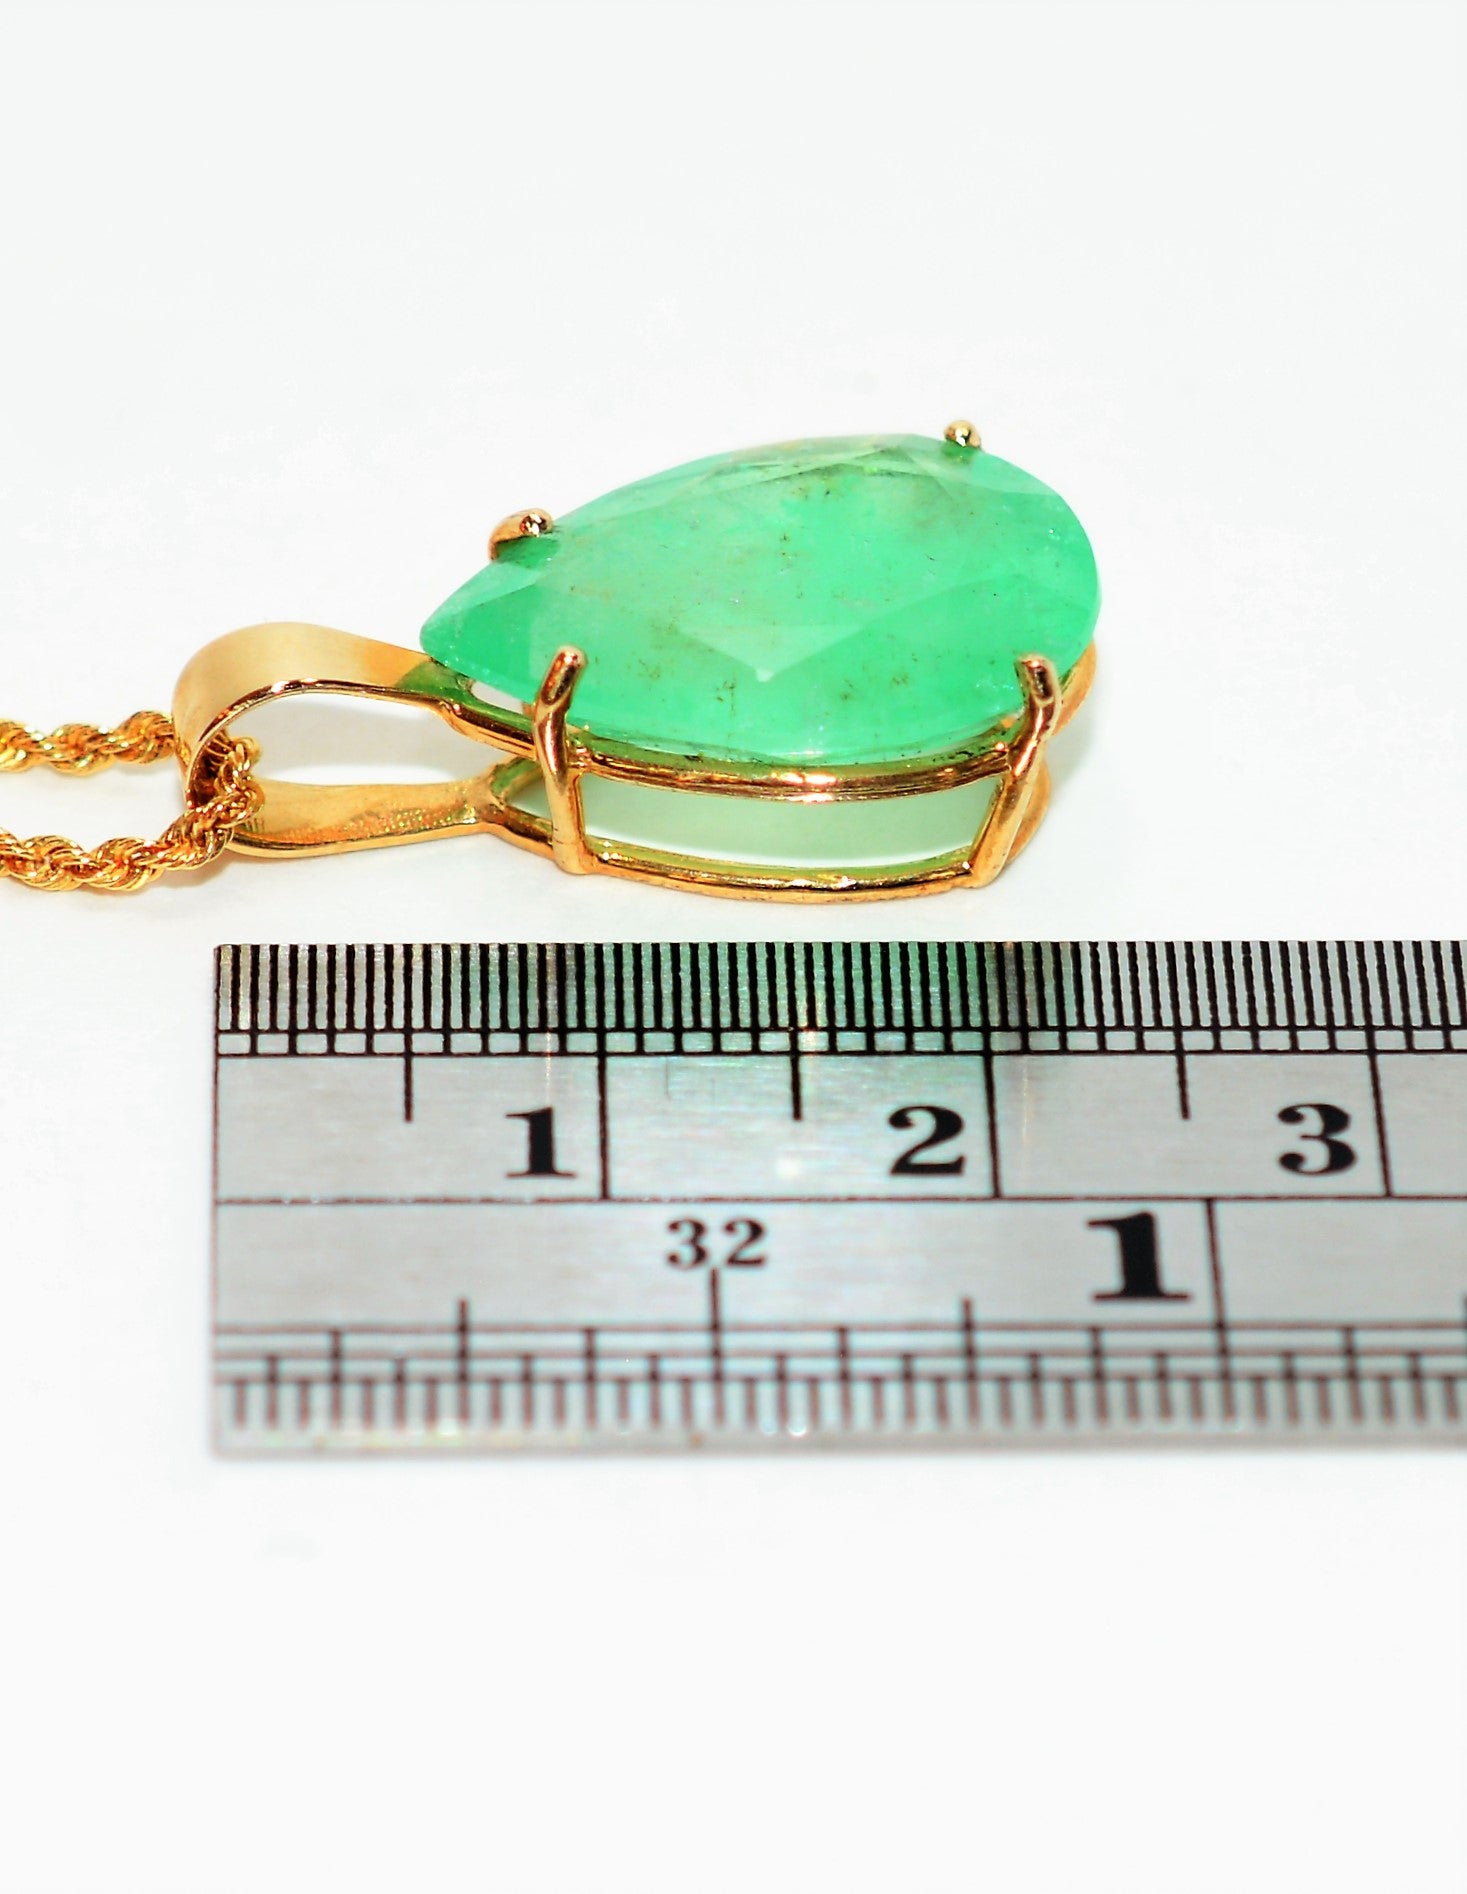 Natural Colombian Emerald Necklace 10K Solid Gold 7.58ct Pendant Necklace Statement Necklace Birthstone Necklace Cocktail Necklace Estate